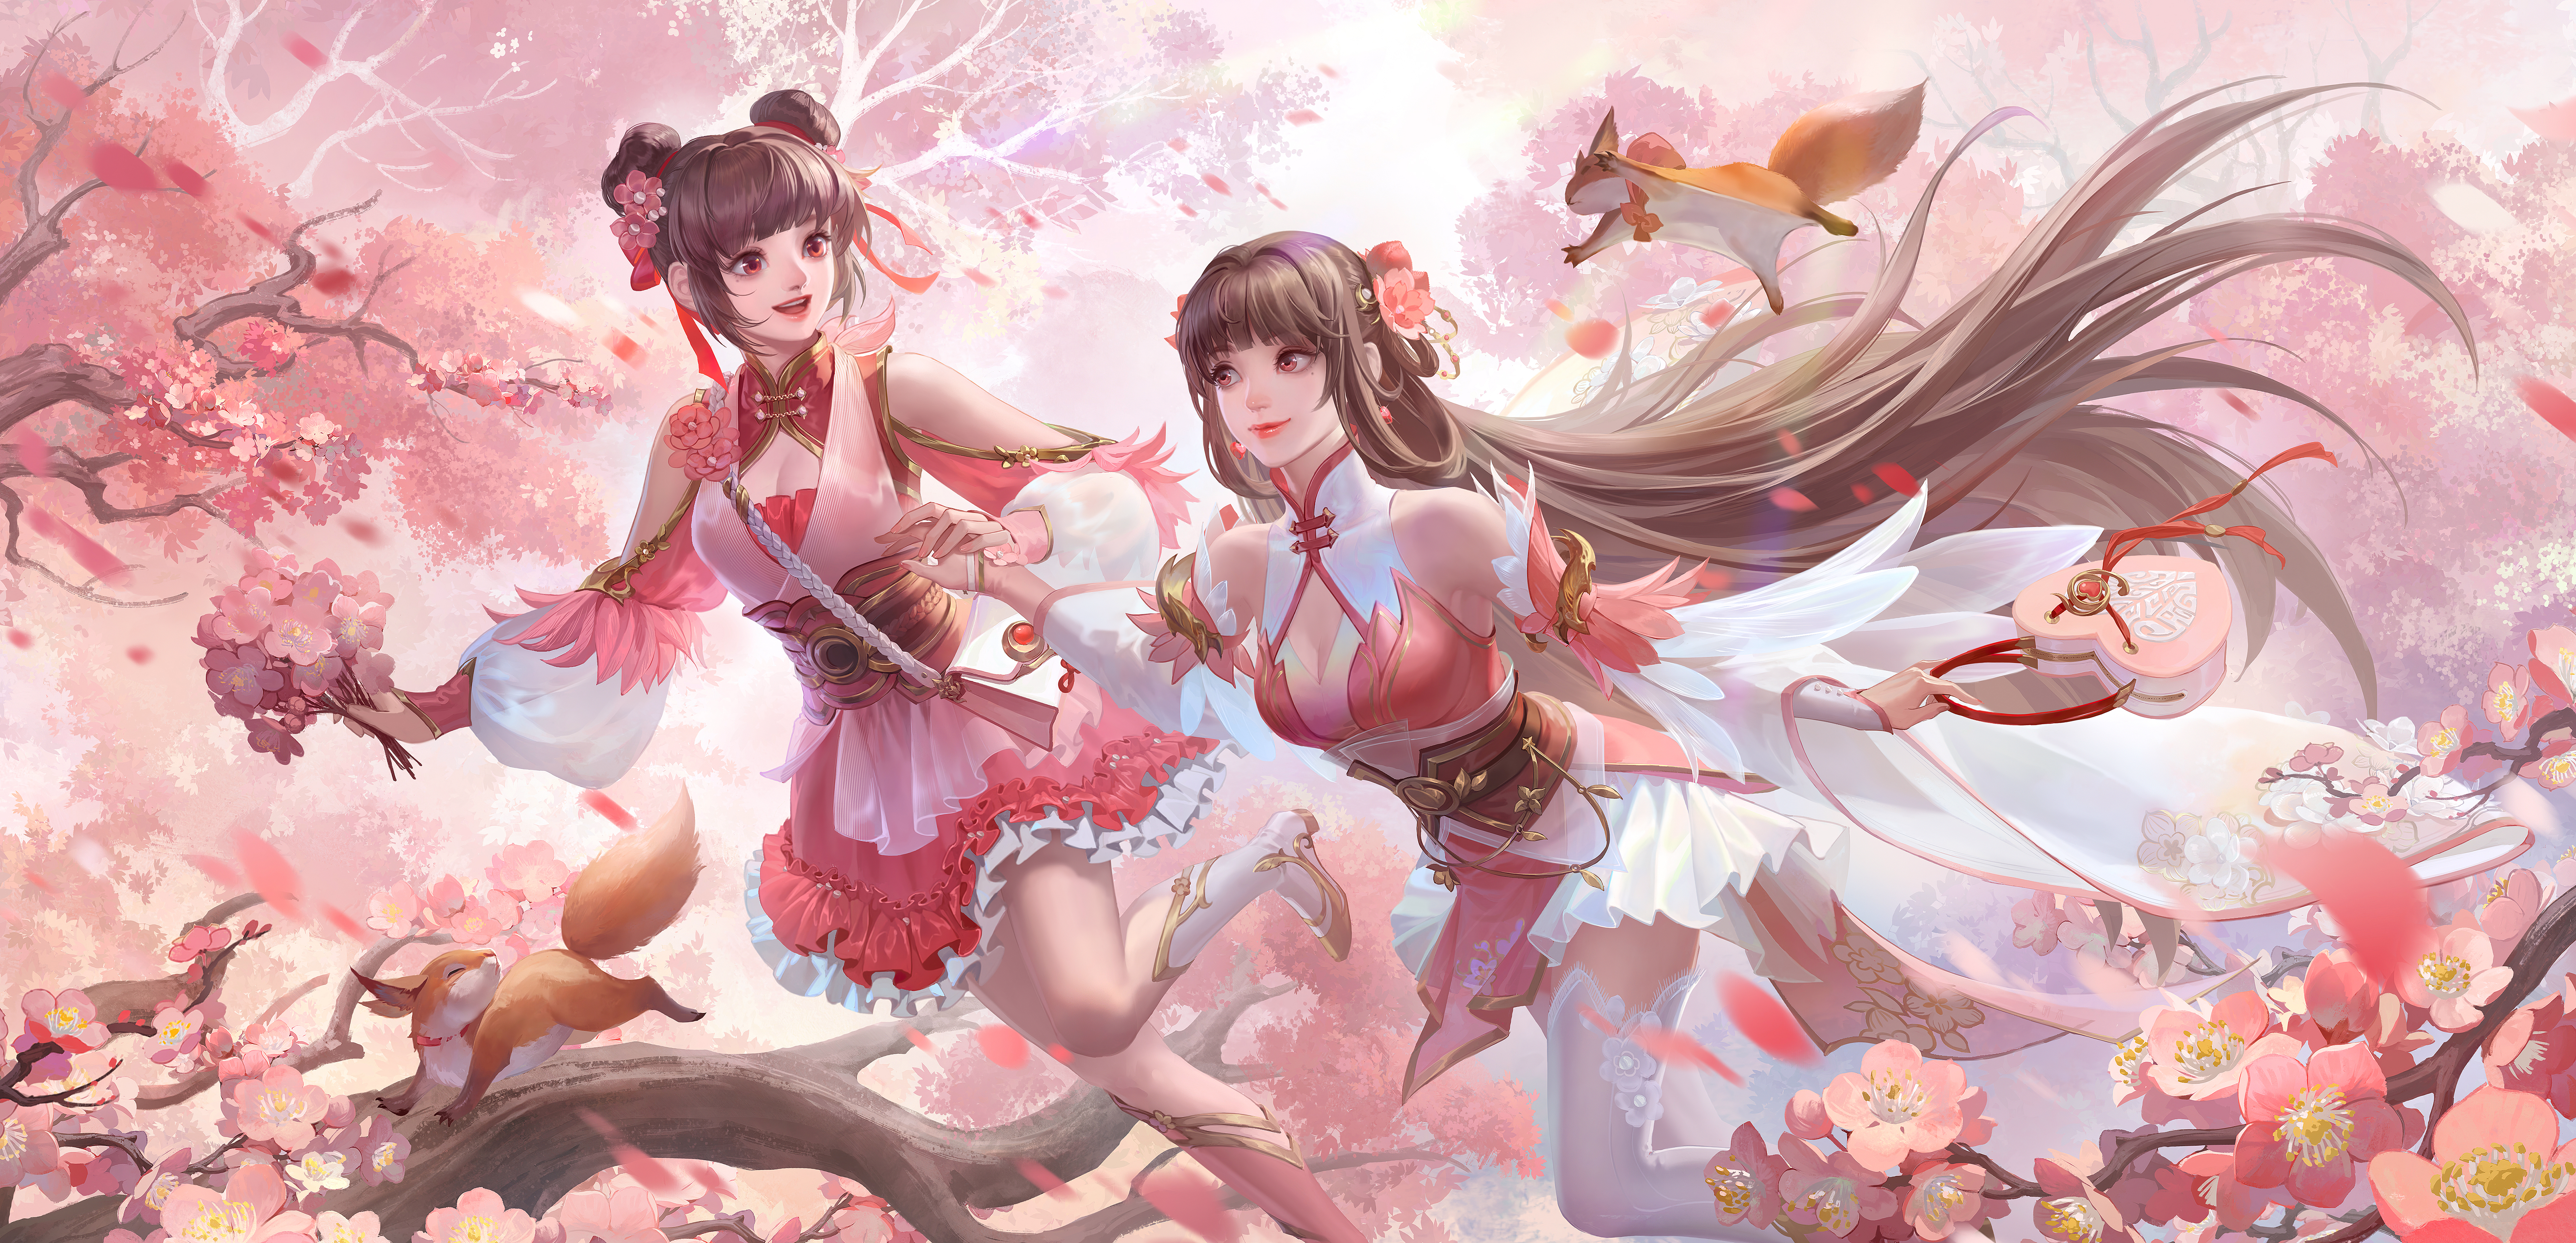 Game Characters Video Games Video Game Girls Video Game Characters Artwork 7669x3700